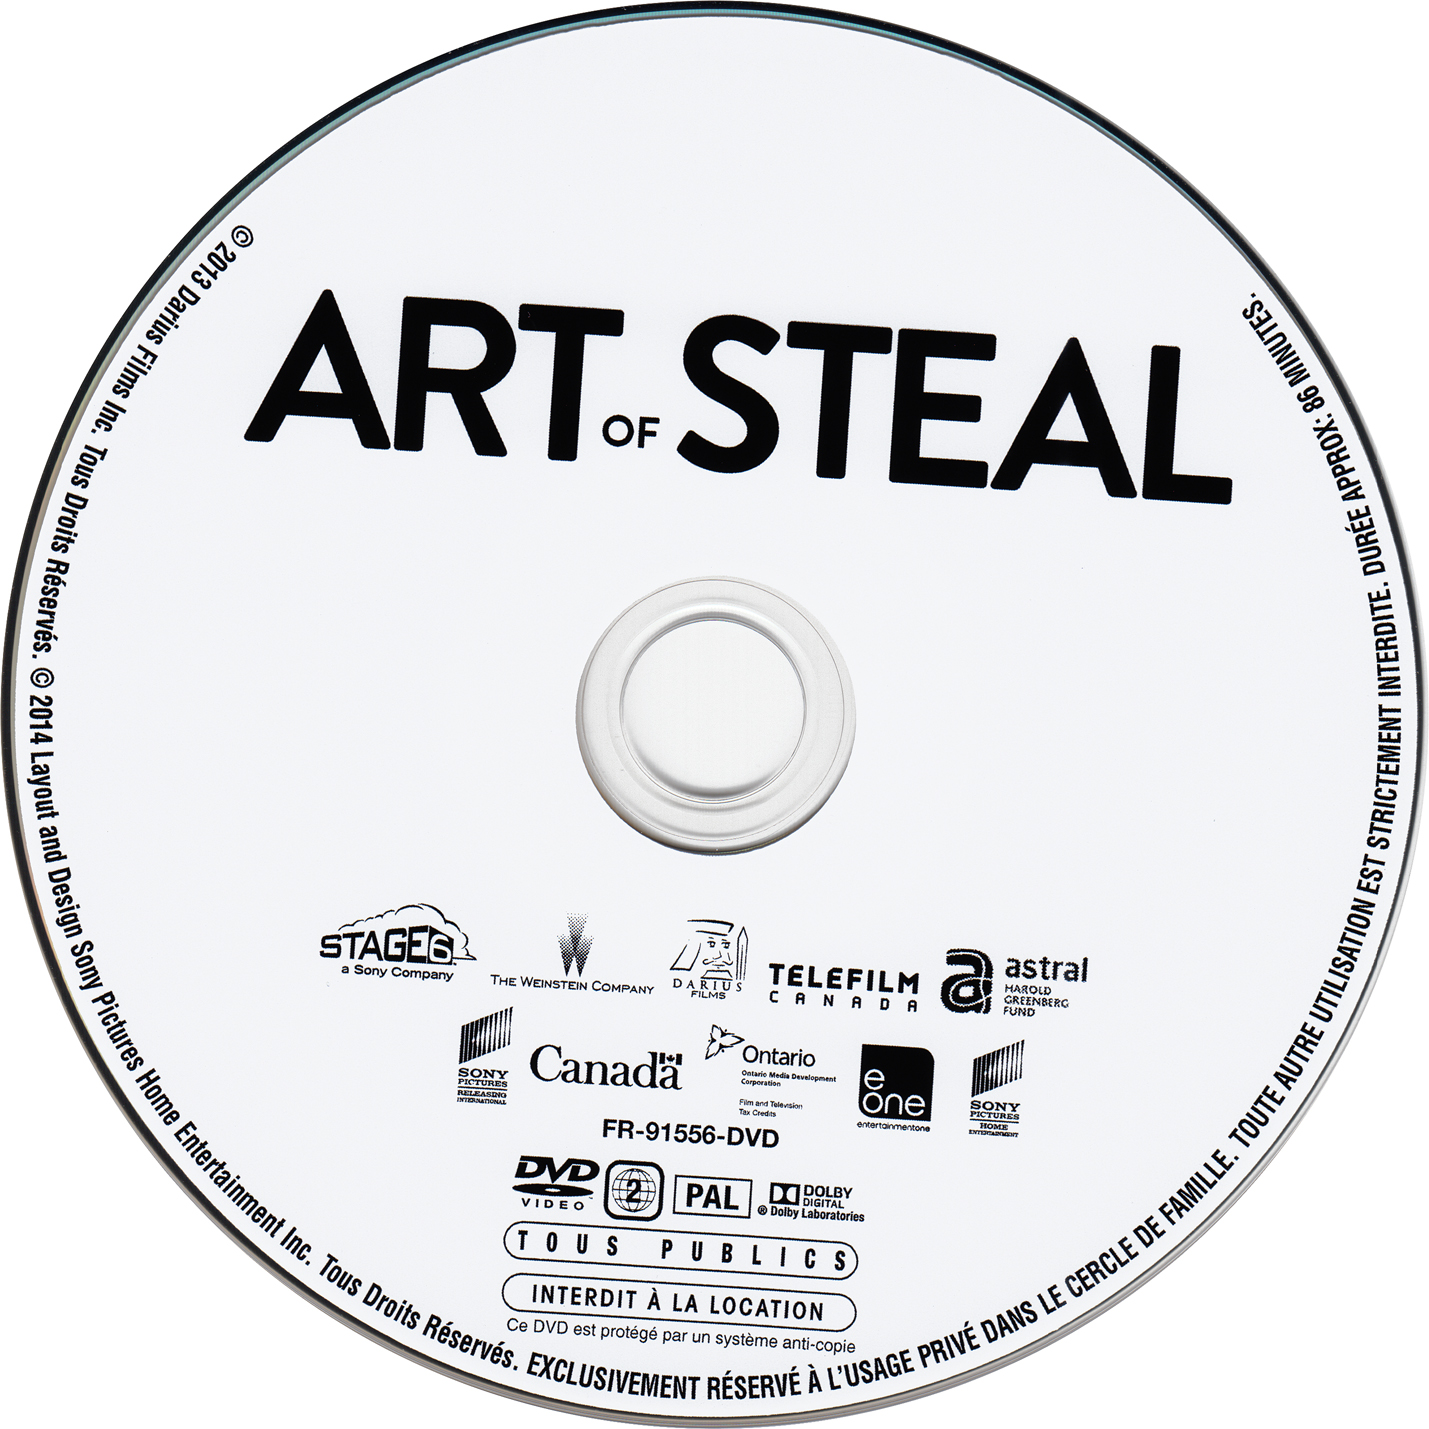 Art of steal